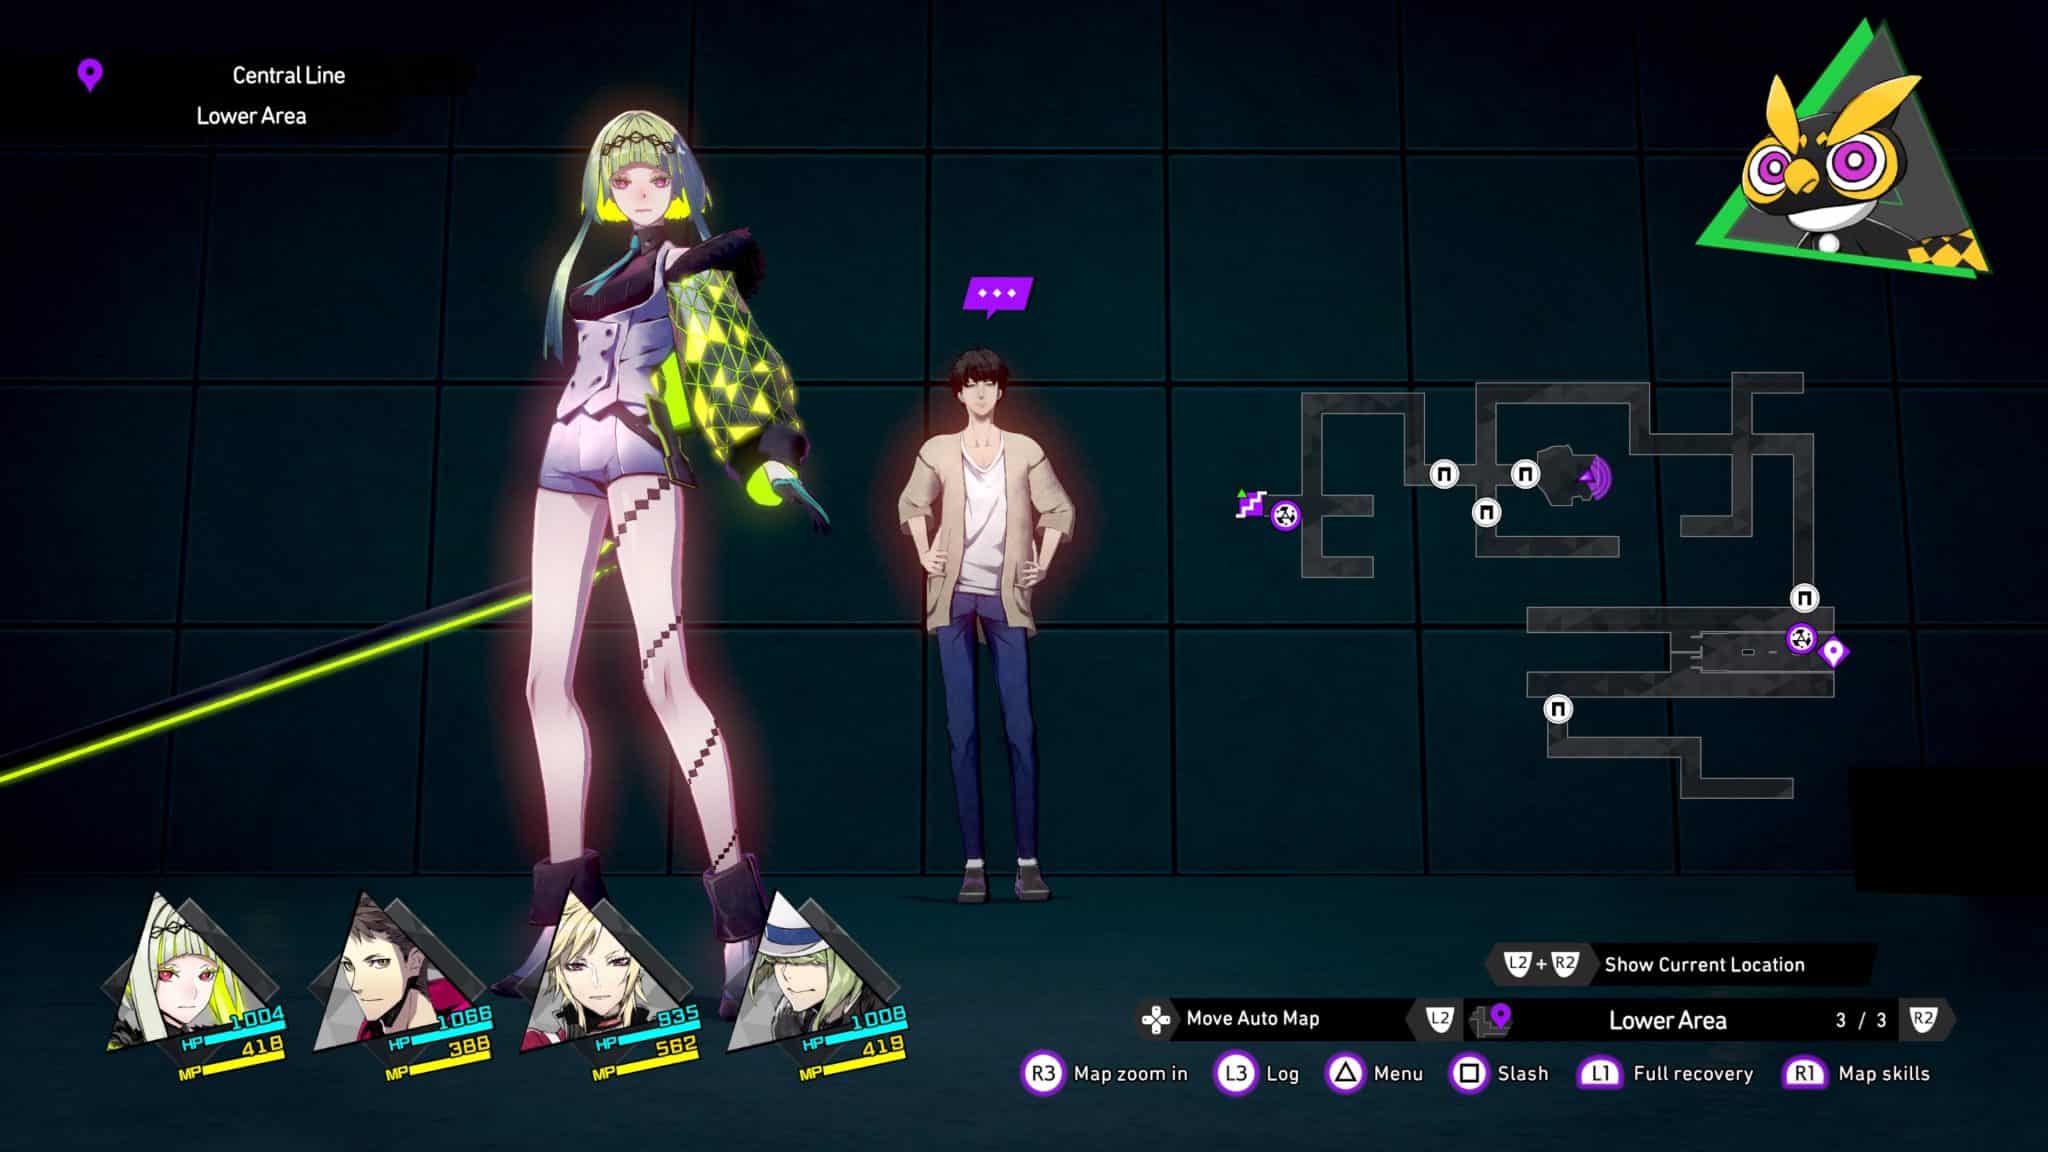 Soul Hackers 2 beginner's guide: 9 tips and tricks to get started